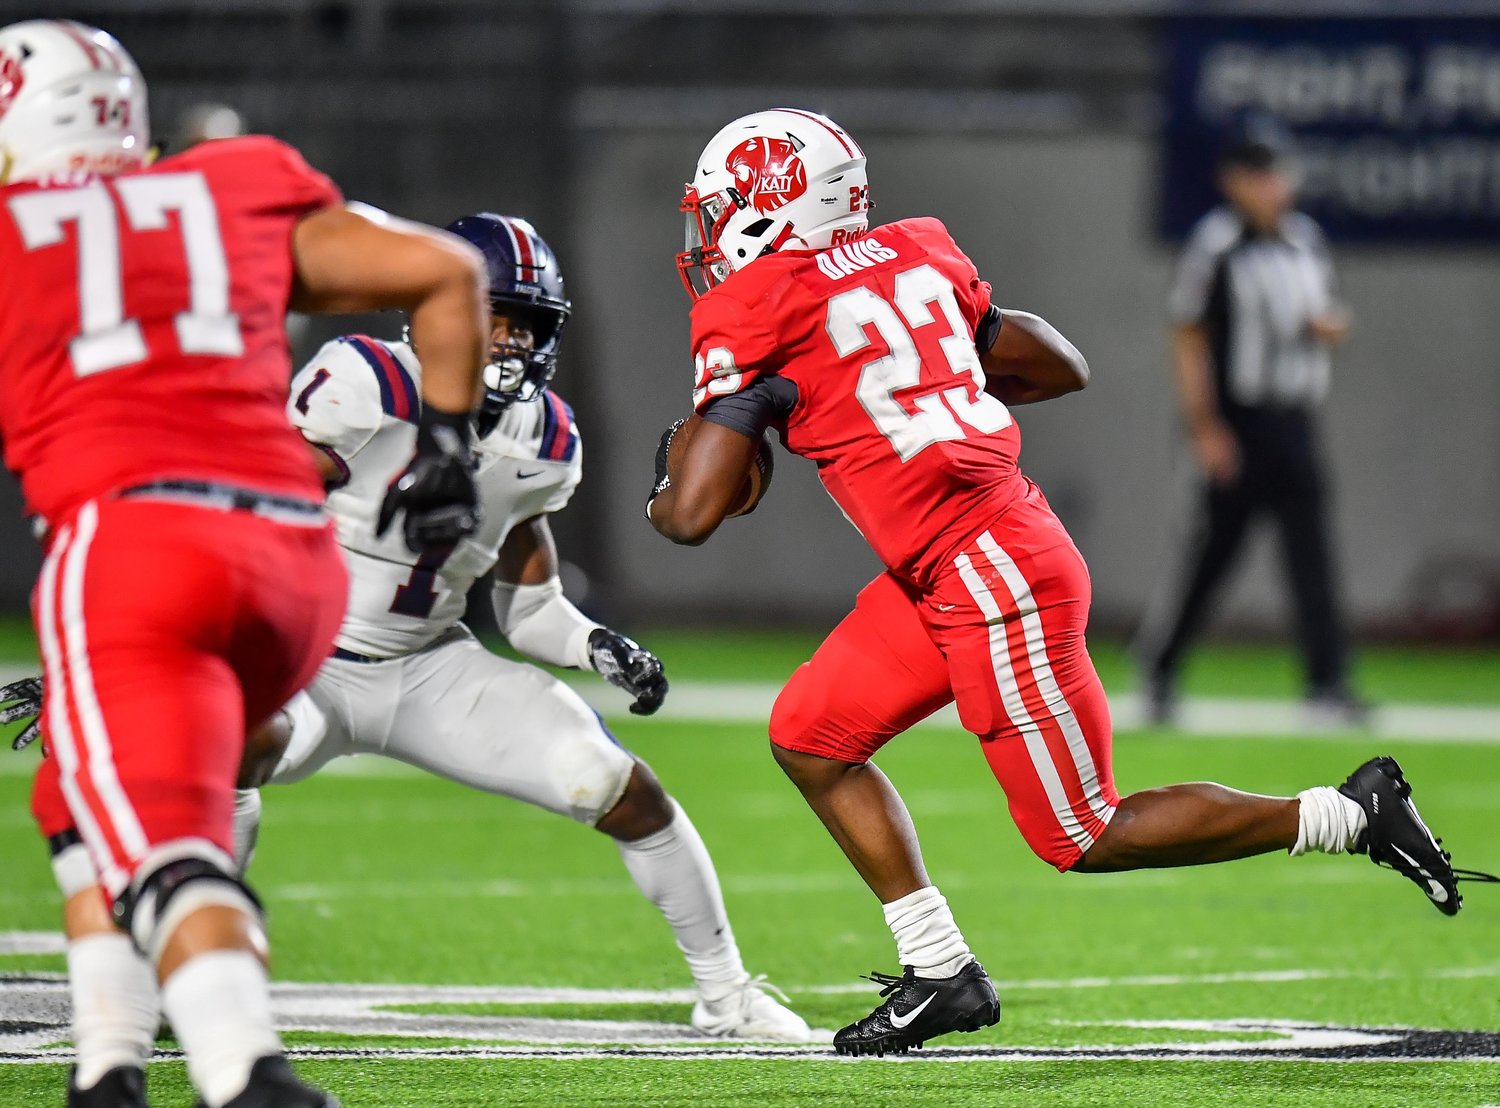 Katy, Tx. Oct. 1, 2021: Katy's #23 Seth Davis takes it up the middle for a TD during a conference game between Katy Tigers and Tompkins Falcons at Legacy Stadium in Katy. (Photo by Mark Goodman / Katy Times)